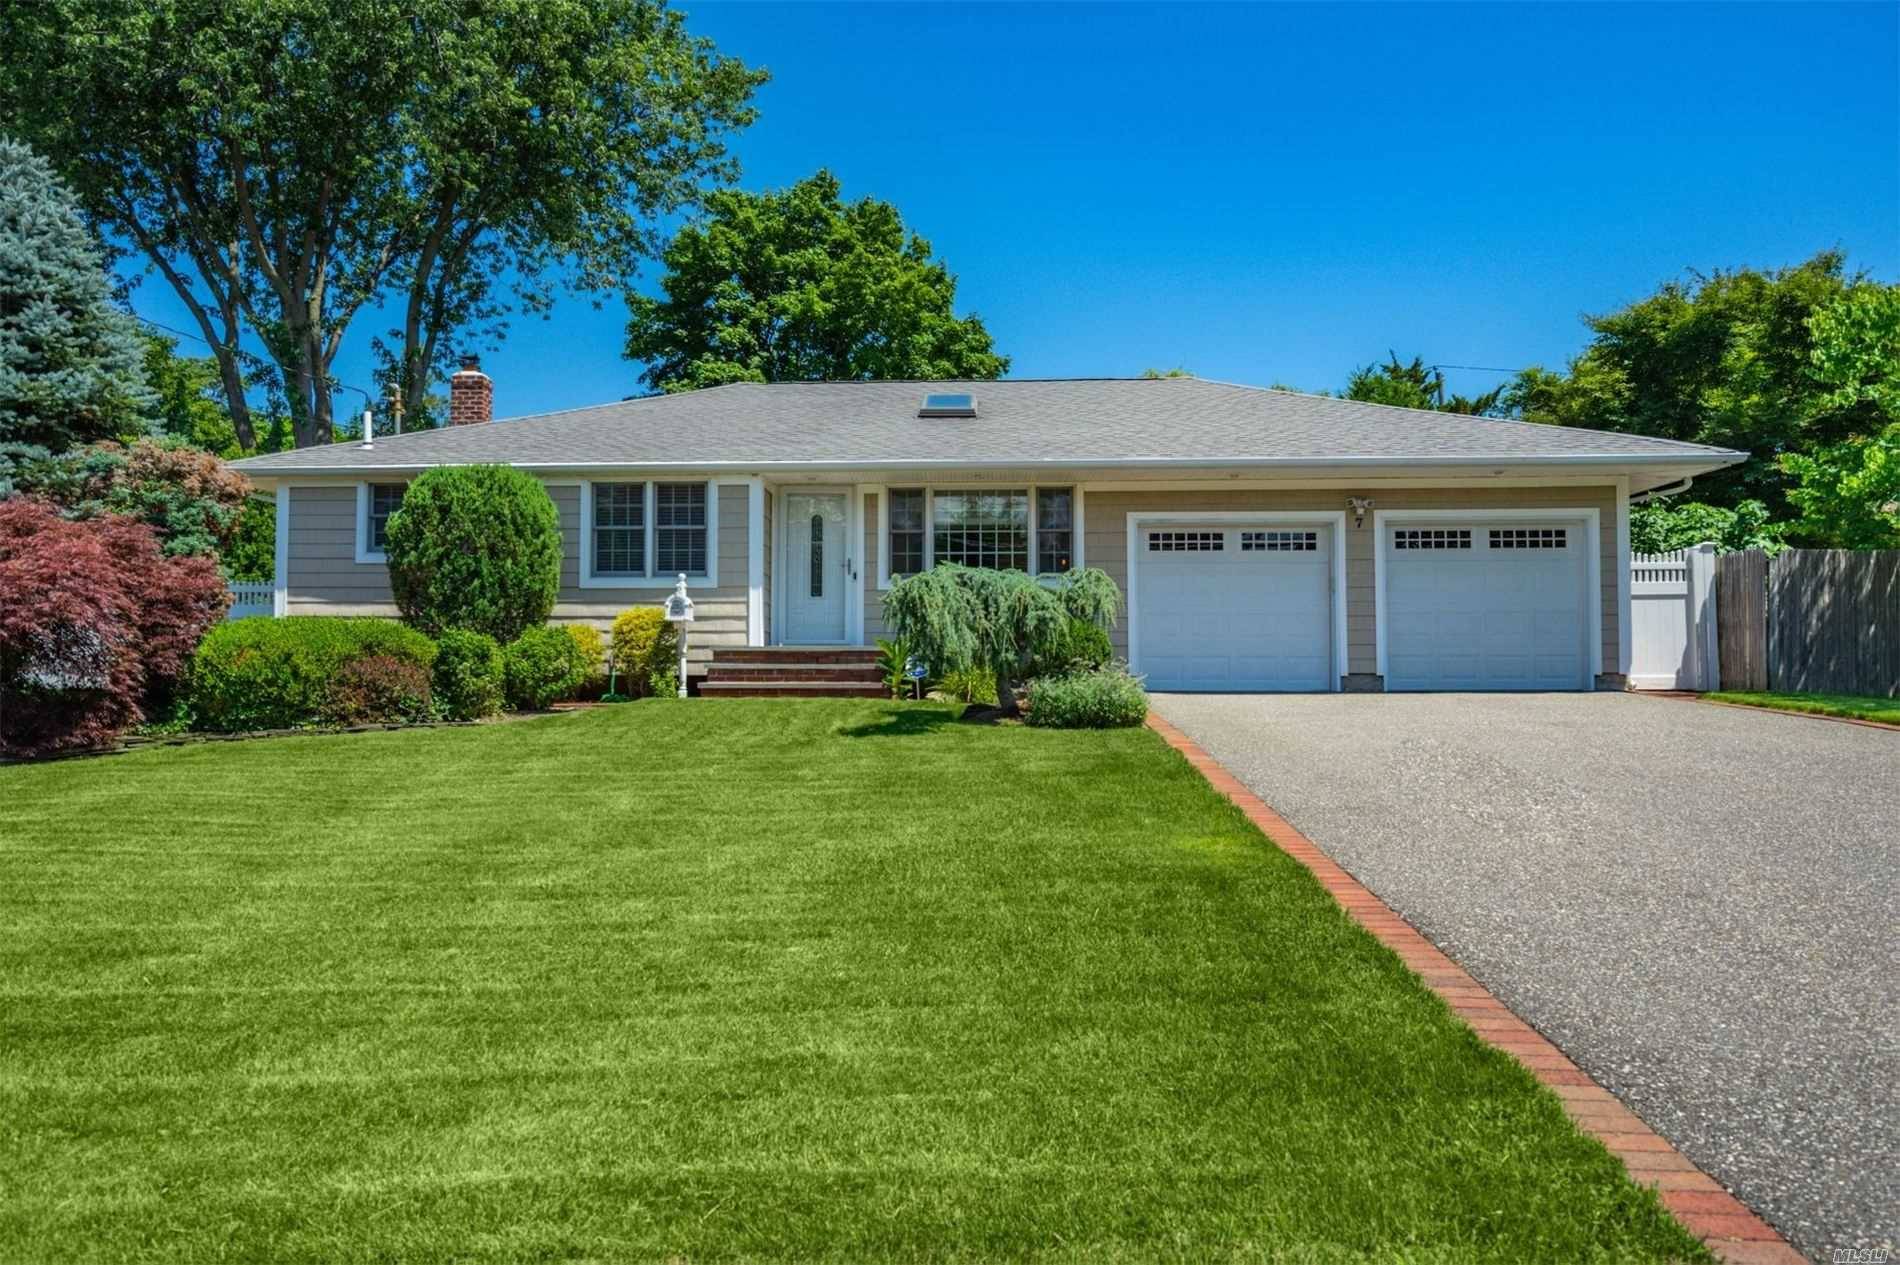 Awesome Ranch Located In College Section Of Smithtown Complete With Formal Living Room Fireplace Vaulted Ceiling High Hats, Formal Dining Area, Eat In Kitchen With Granite Counters Stainless Steel Appliances ...